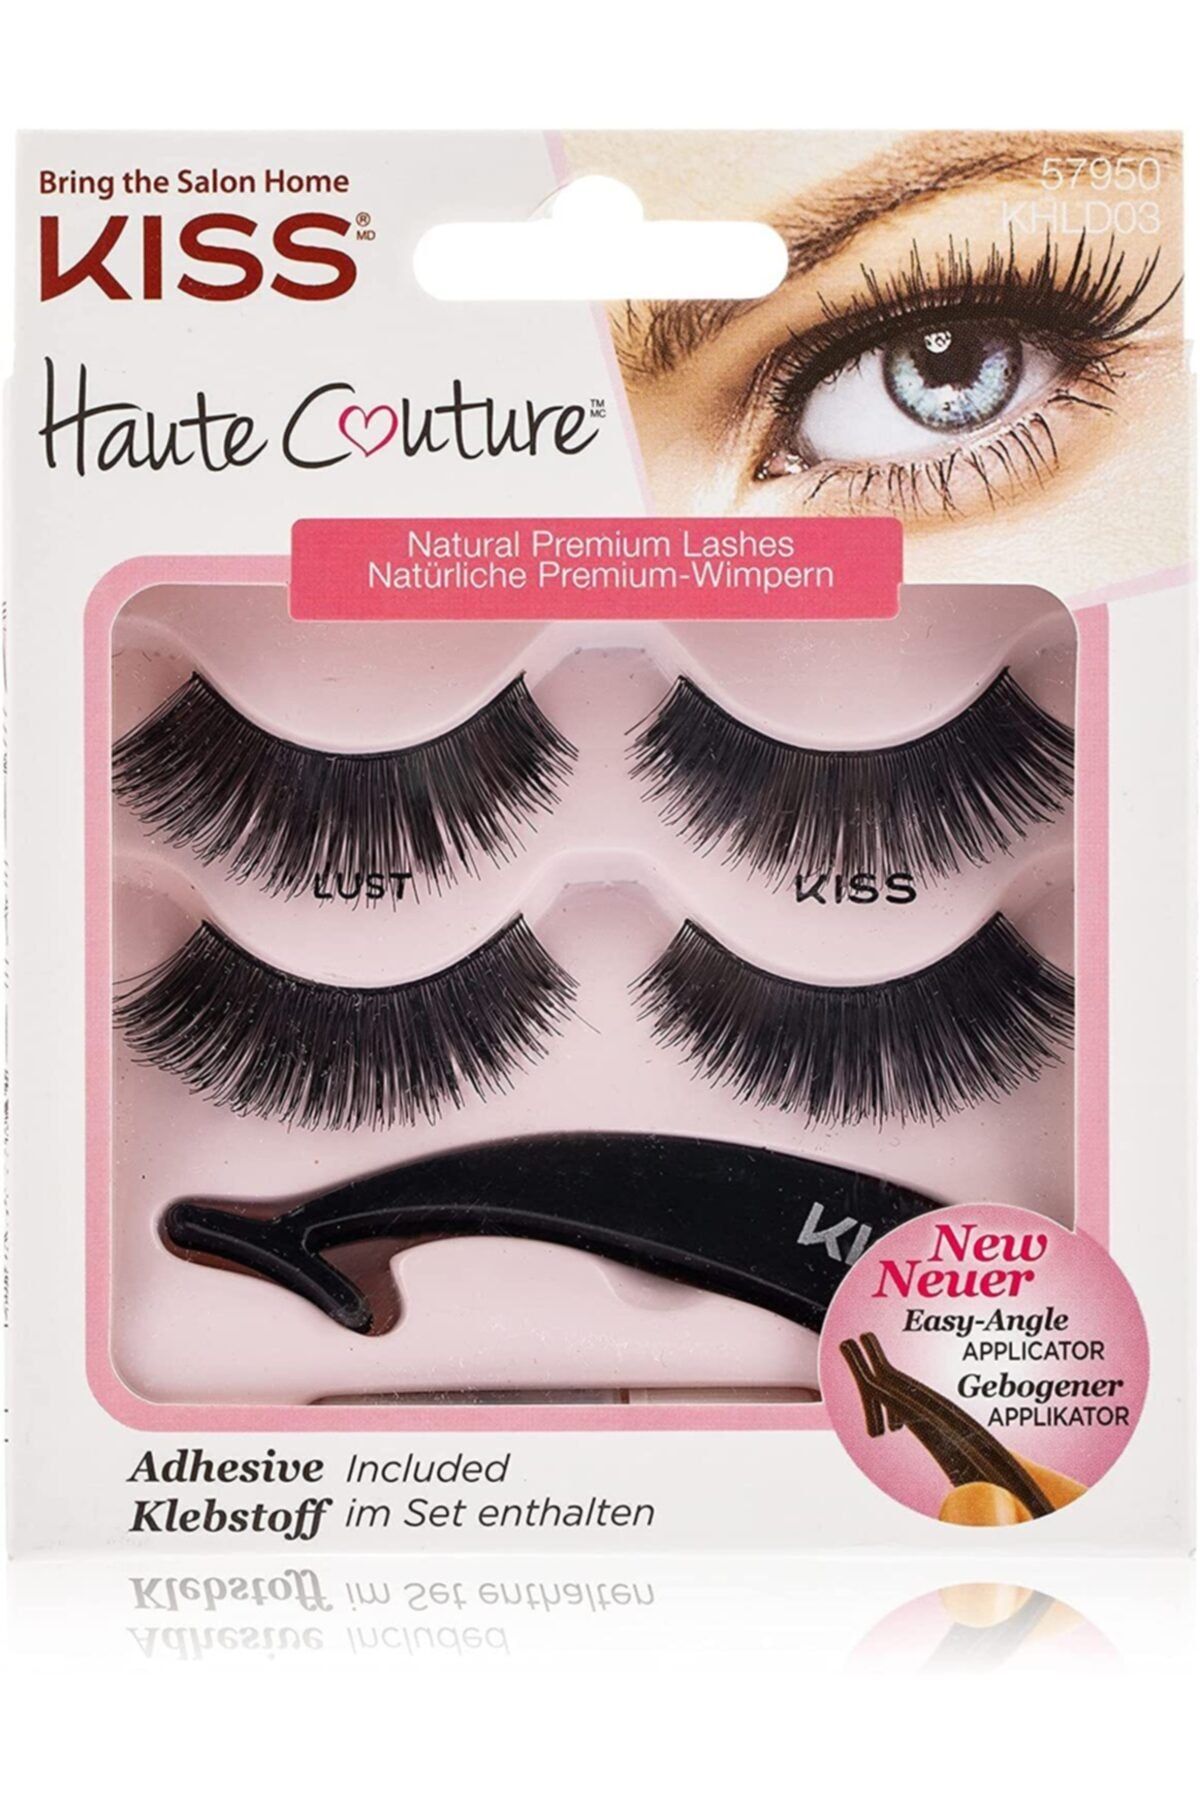 Kiss Haute Couture Duo Pack Lashes Coy Khld03